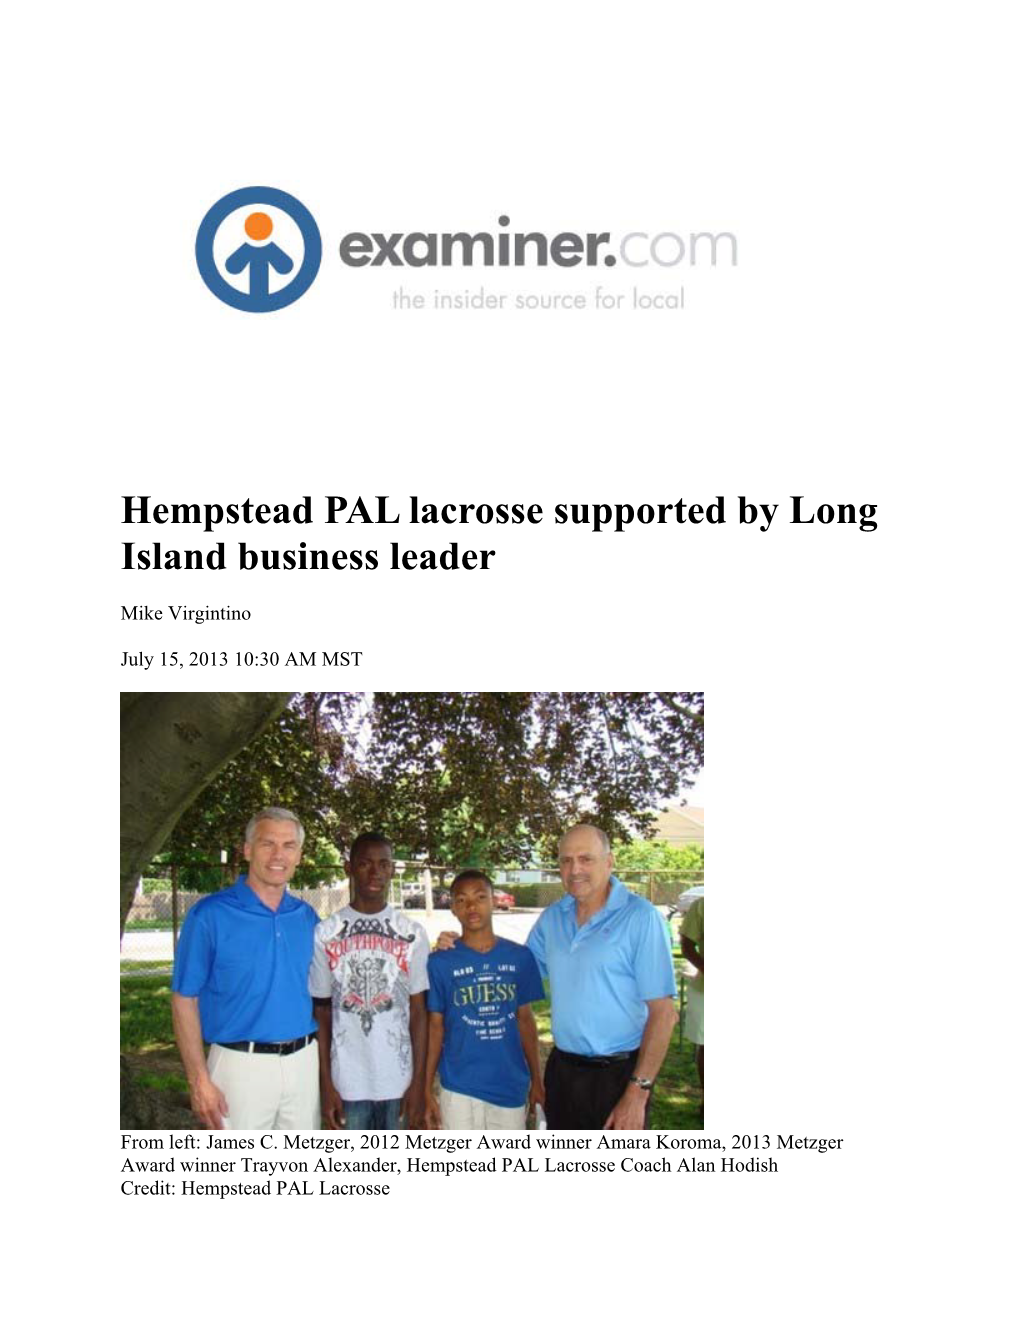 Hempstead PAL Lacrosse Supported by Long Island Business Leader